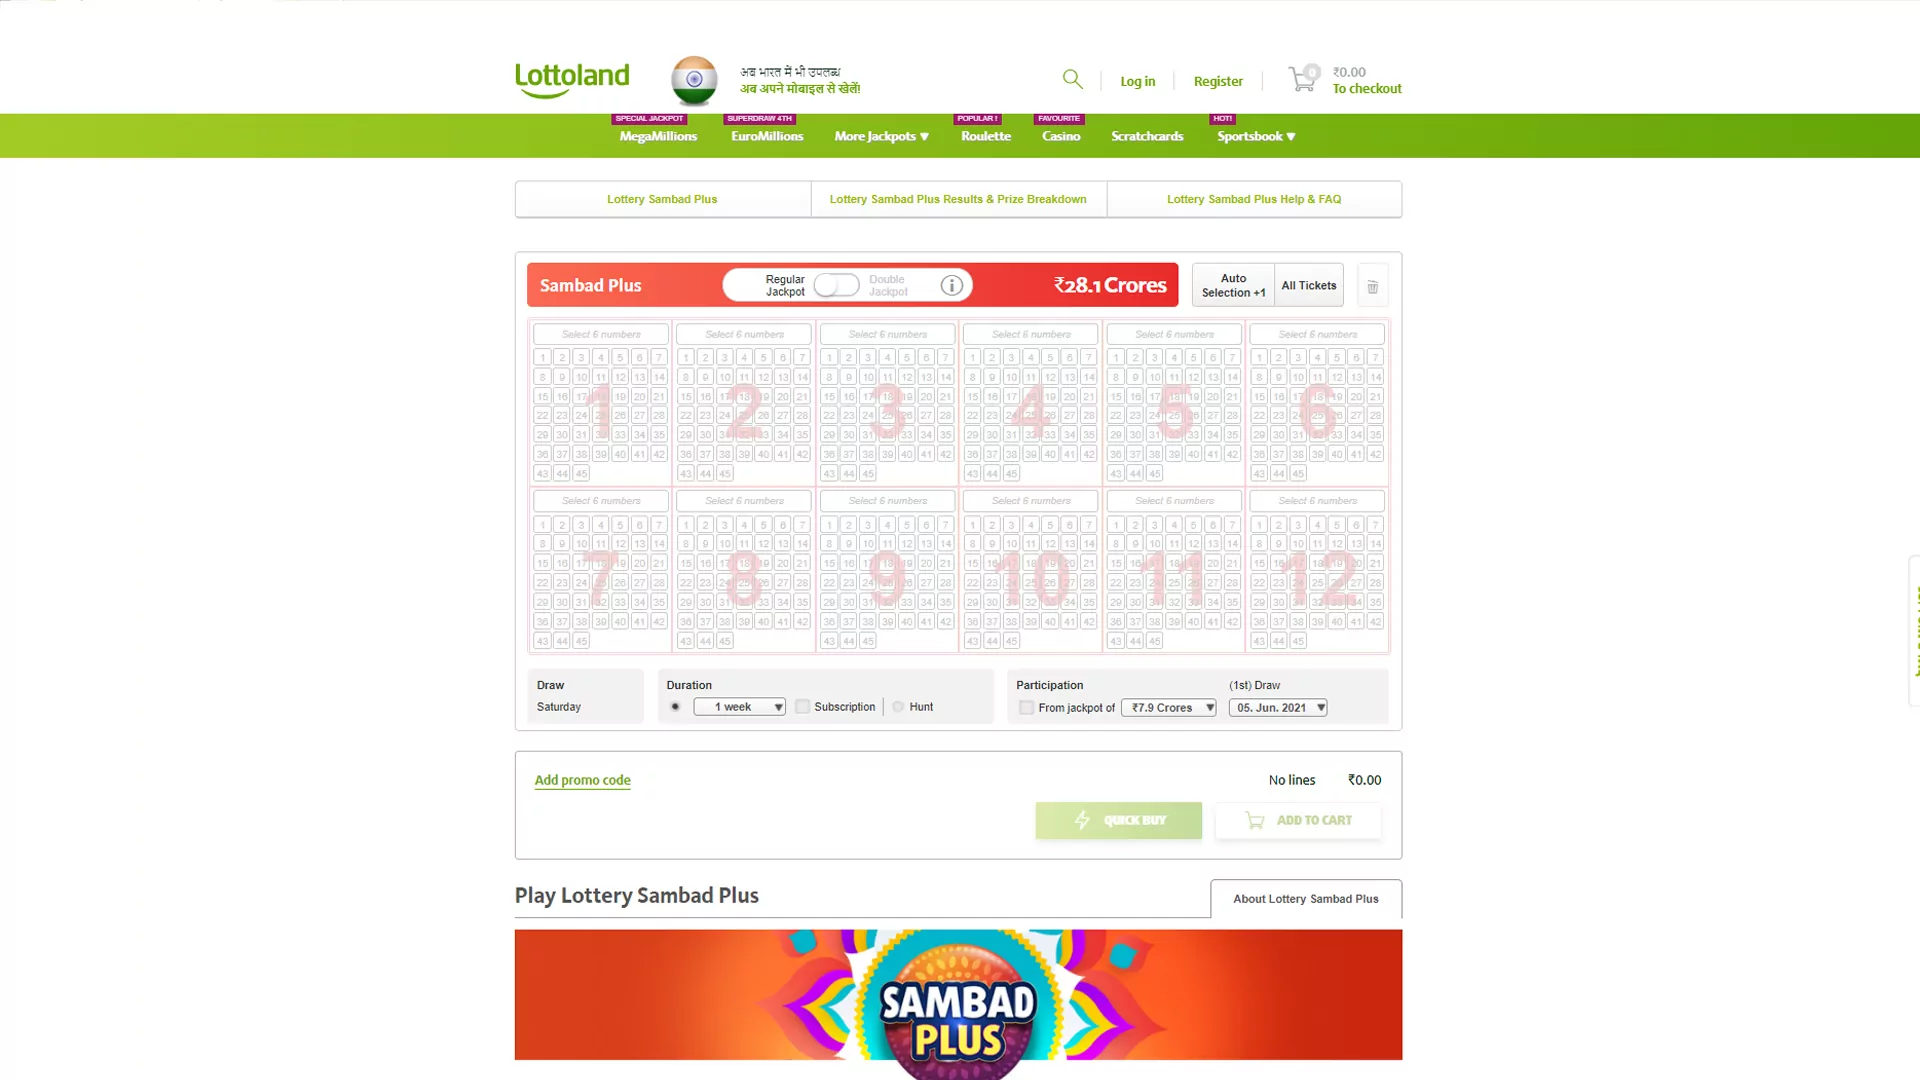 In Sambad Plus, you can buy the cheapest lottery tickets.